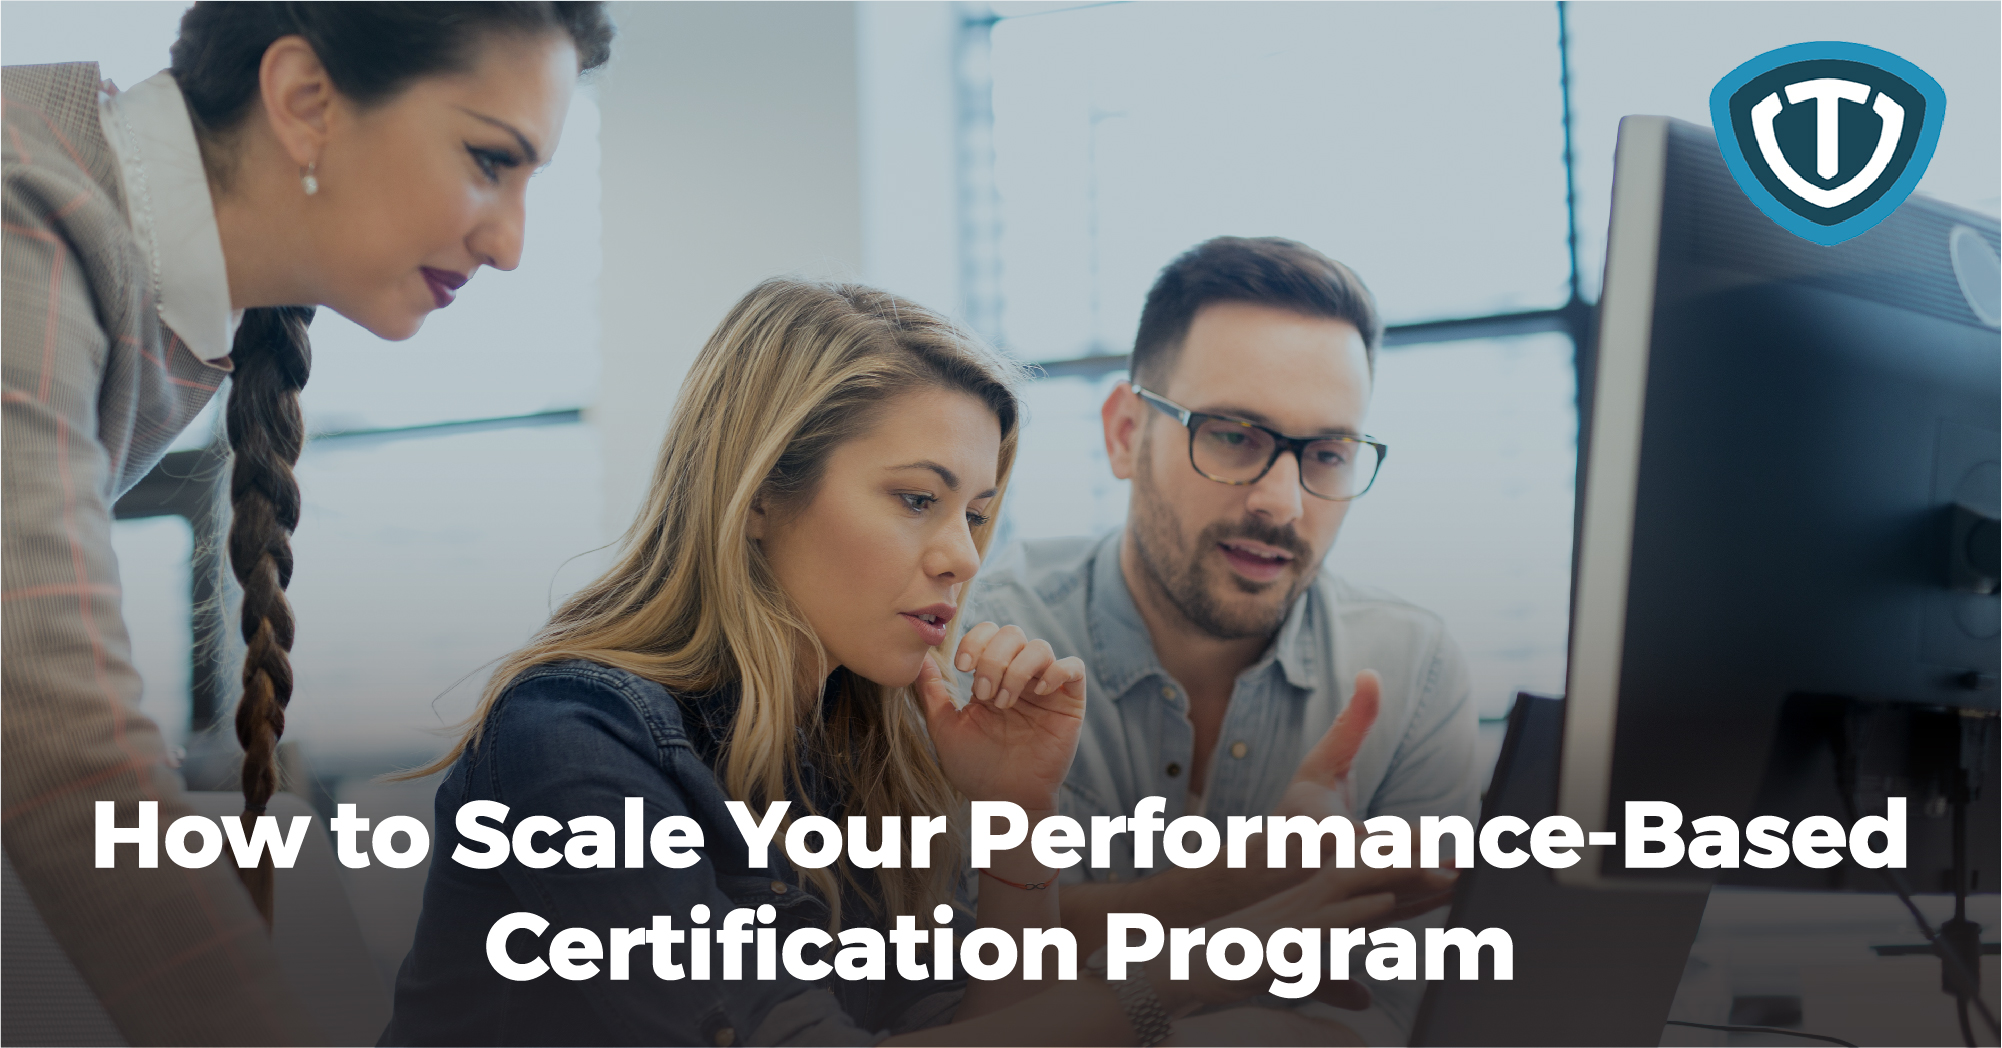 Scale Your Performance-Based Certification Program